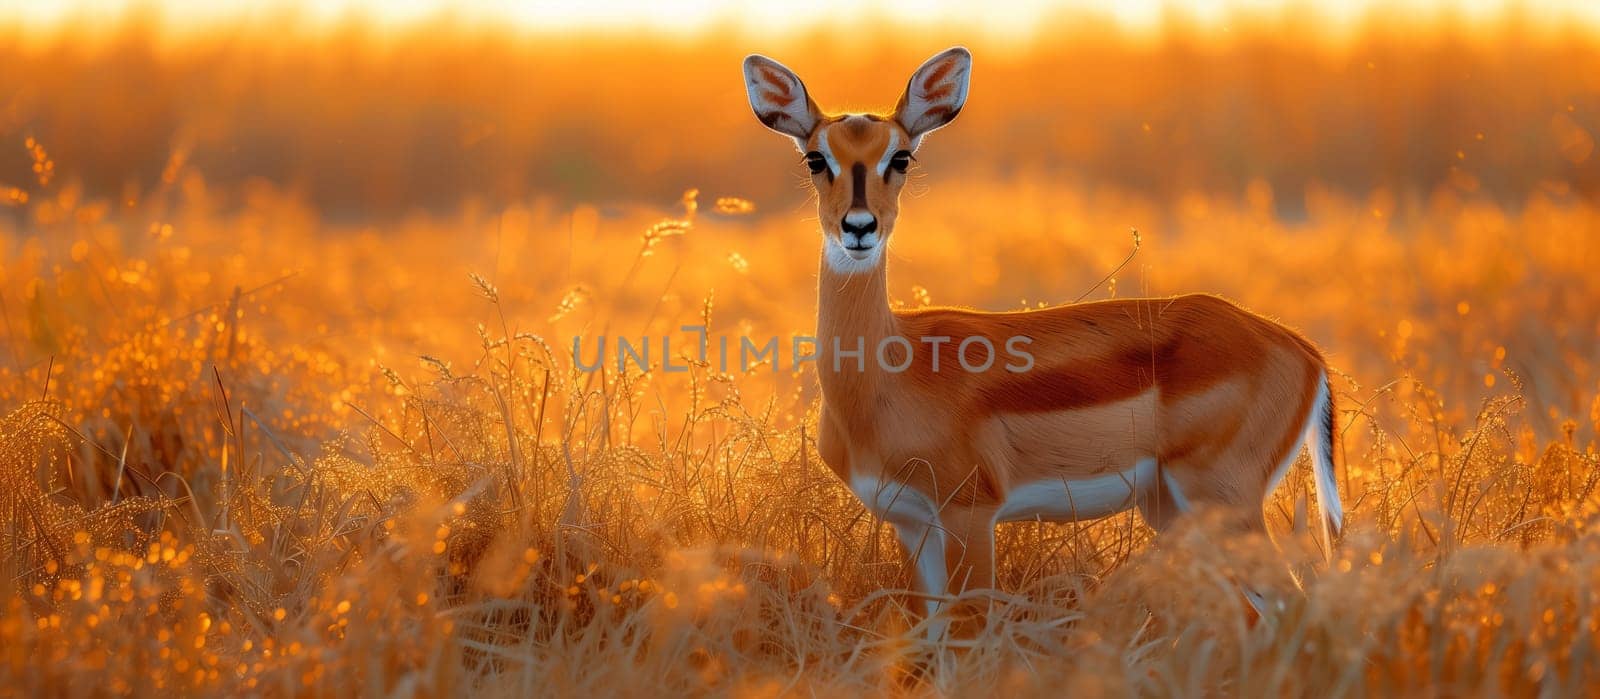 A deer, a terrestrial animal, stands in a grassland ecoregion at sunset, surrounded by tall grass. The natural landscape creates a peaceful scene as the deer grazes in the plain